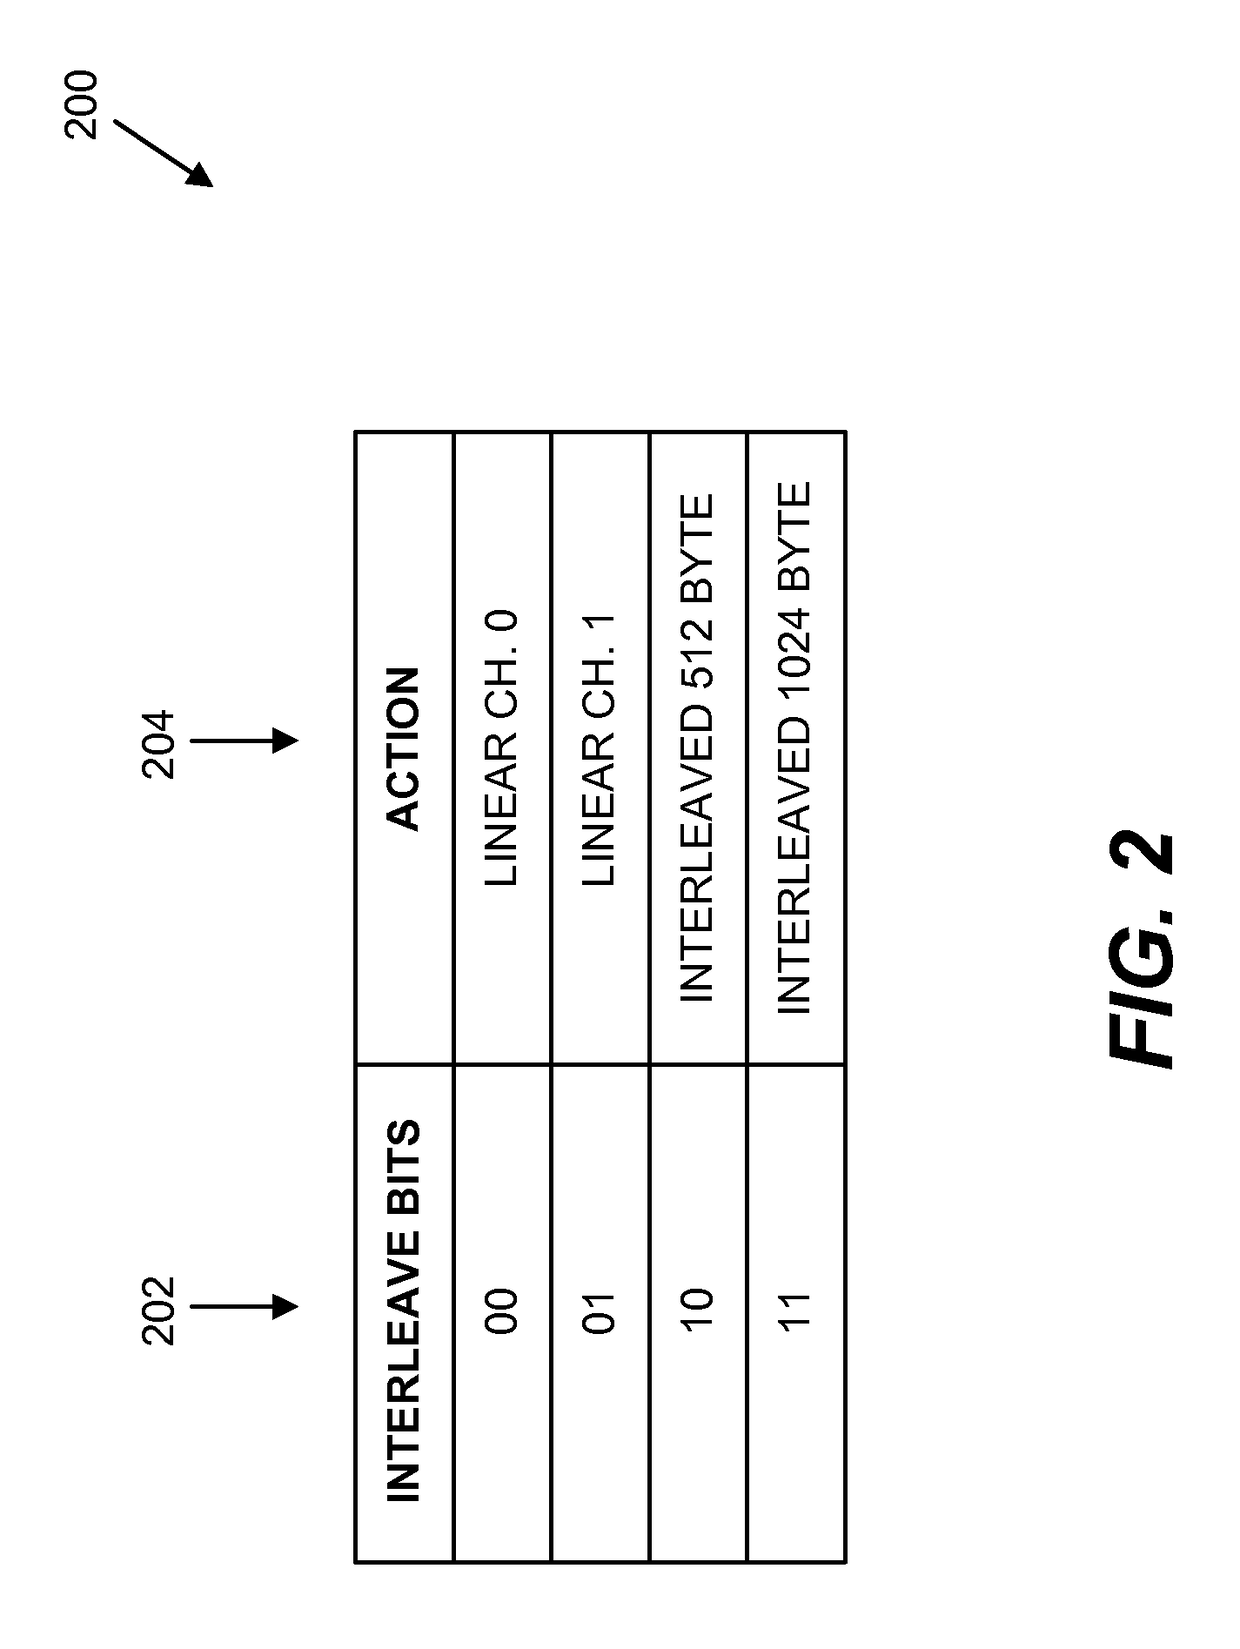 System and method for memory management using dynamic partial channel interleaving